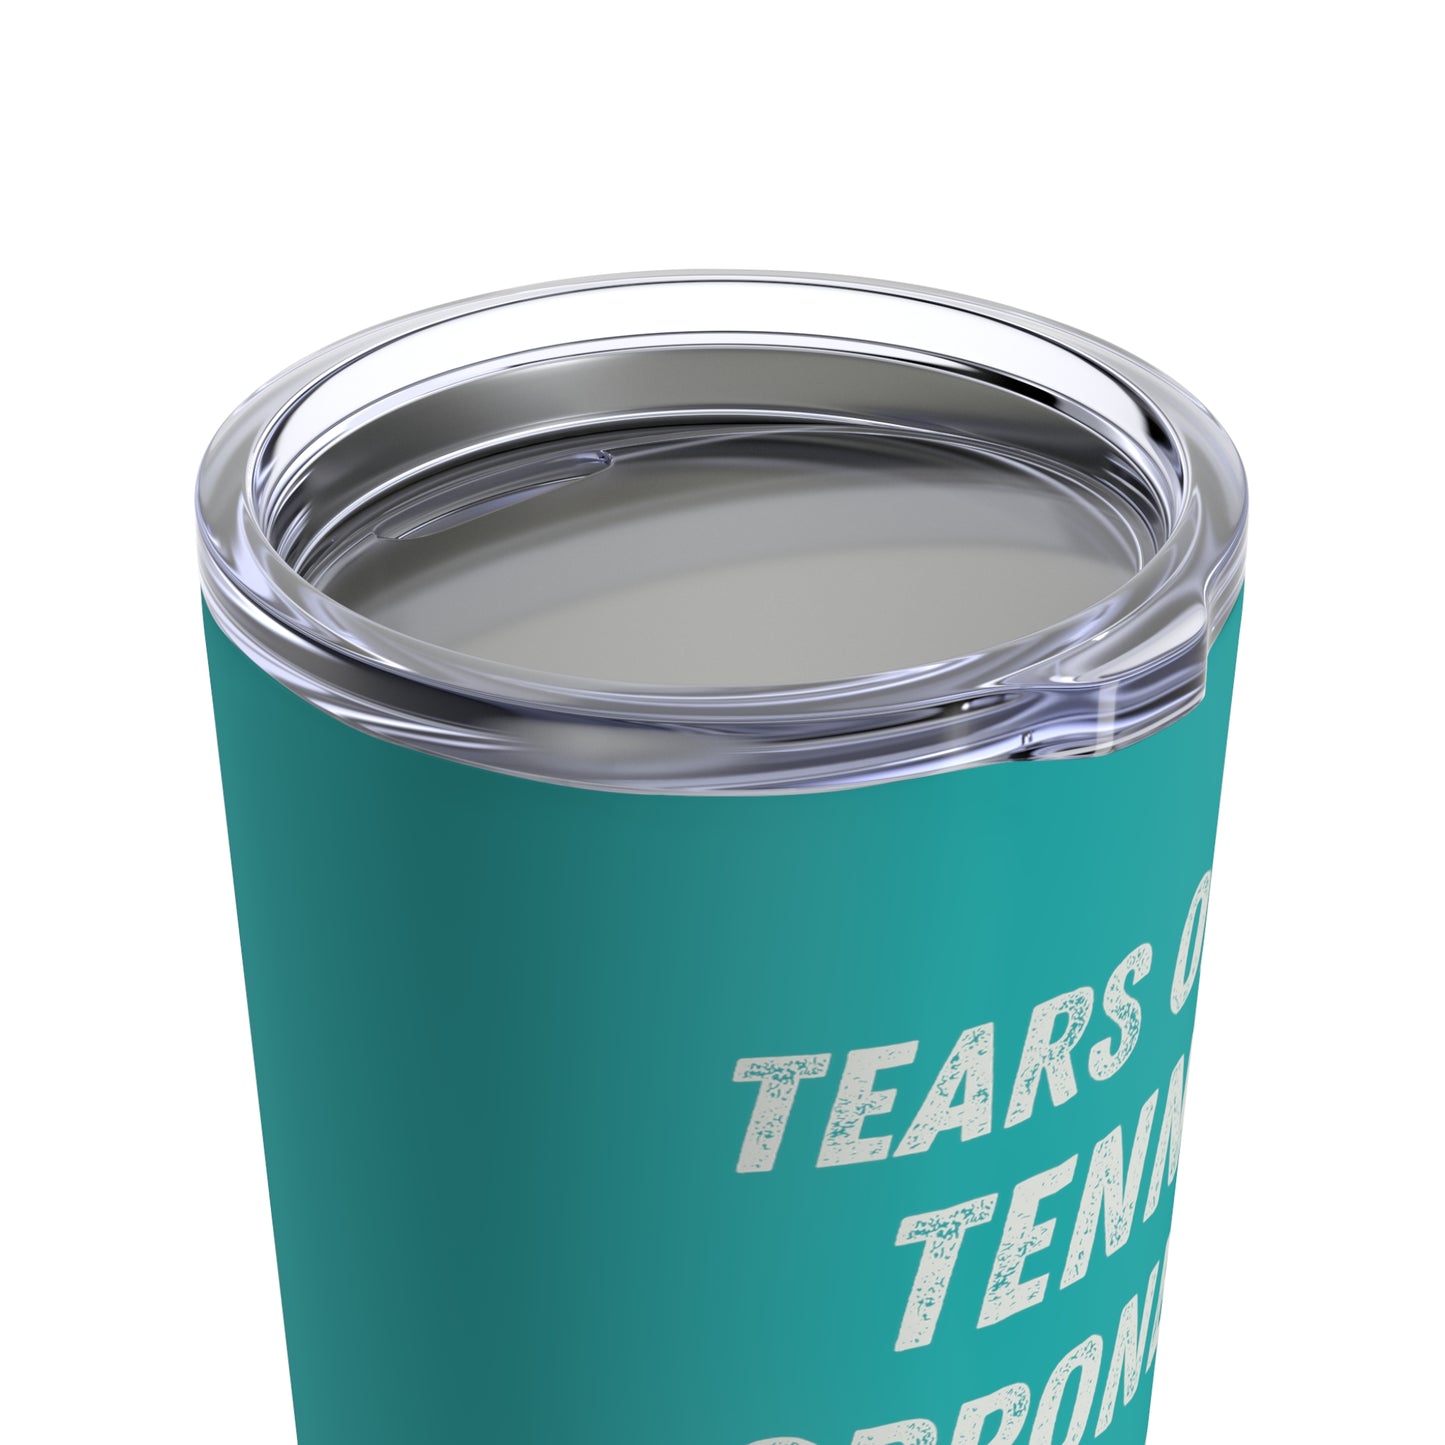 Tears of my Tennis Opponents Tumbler 20oz